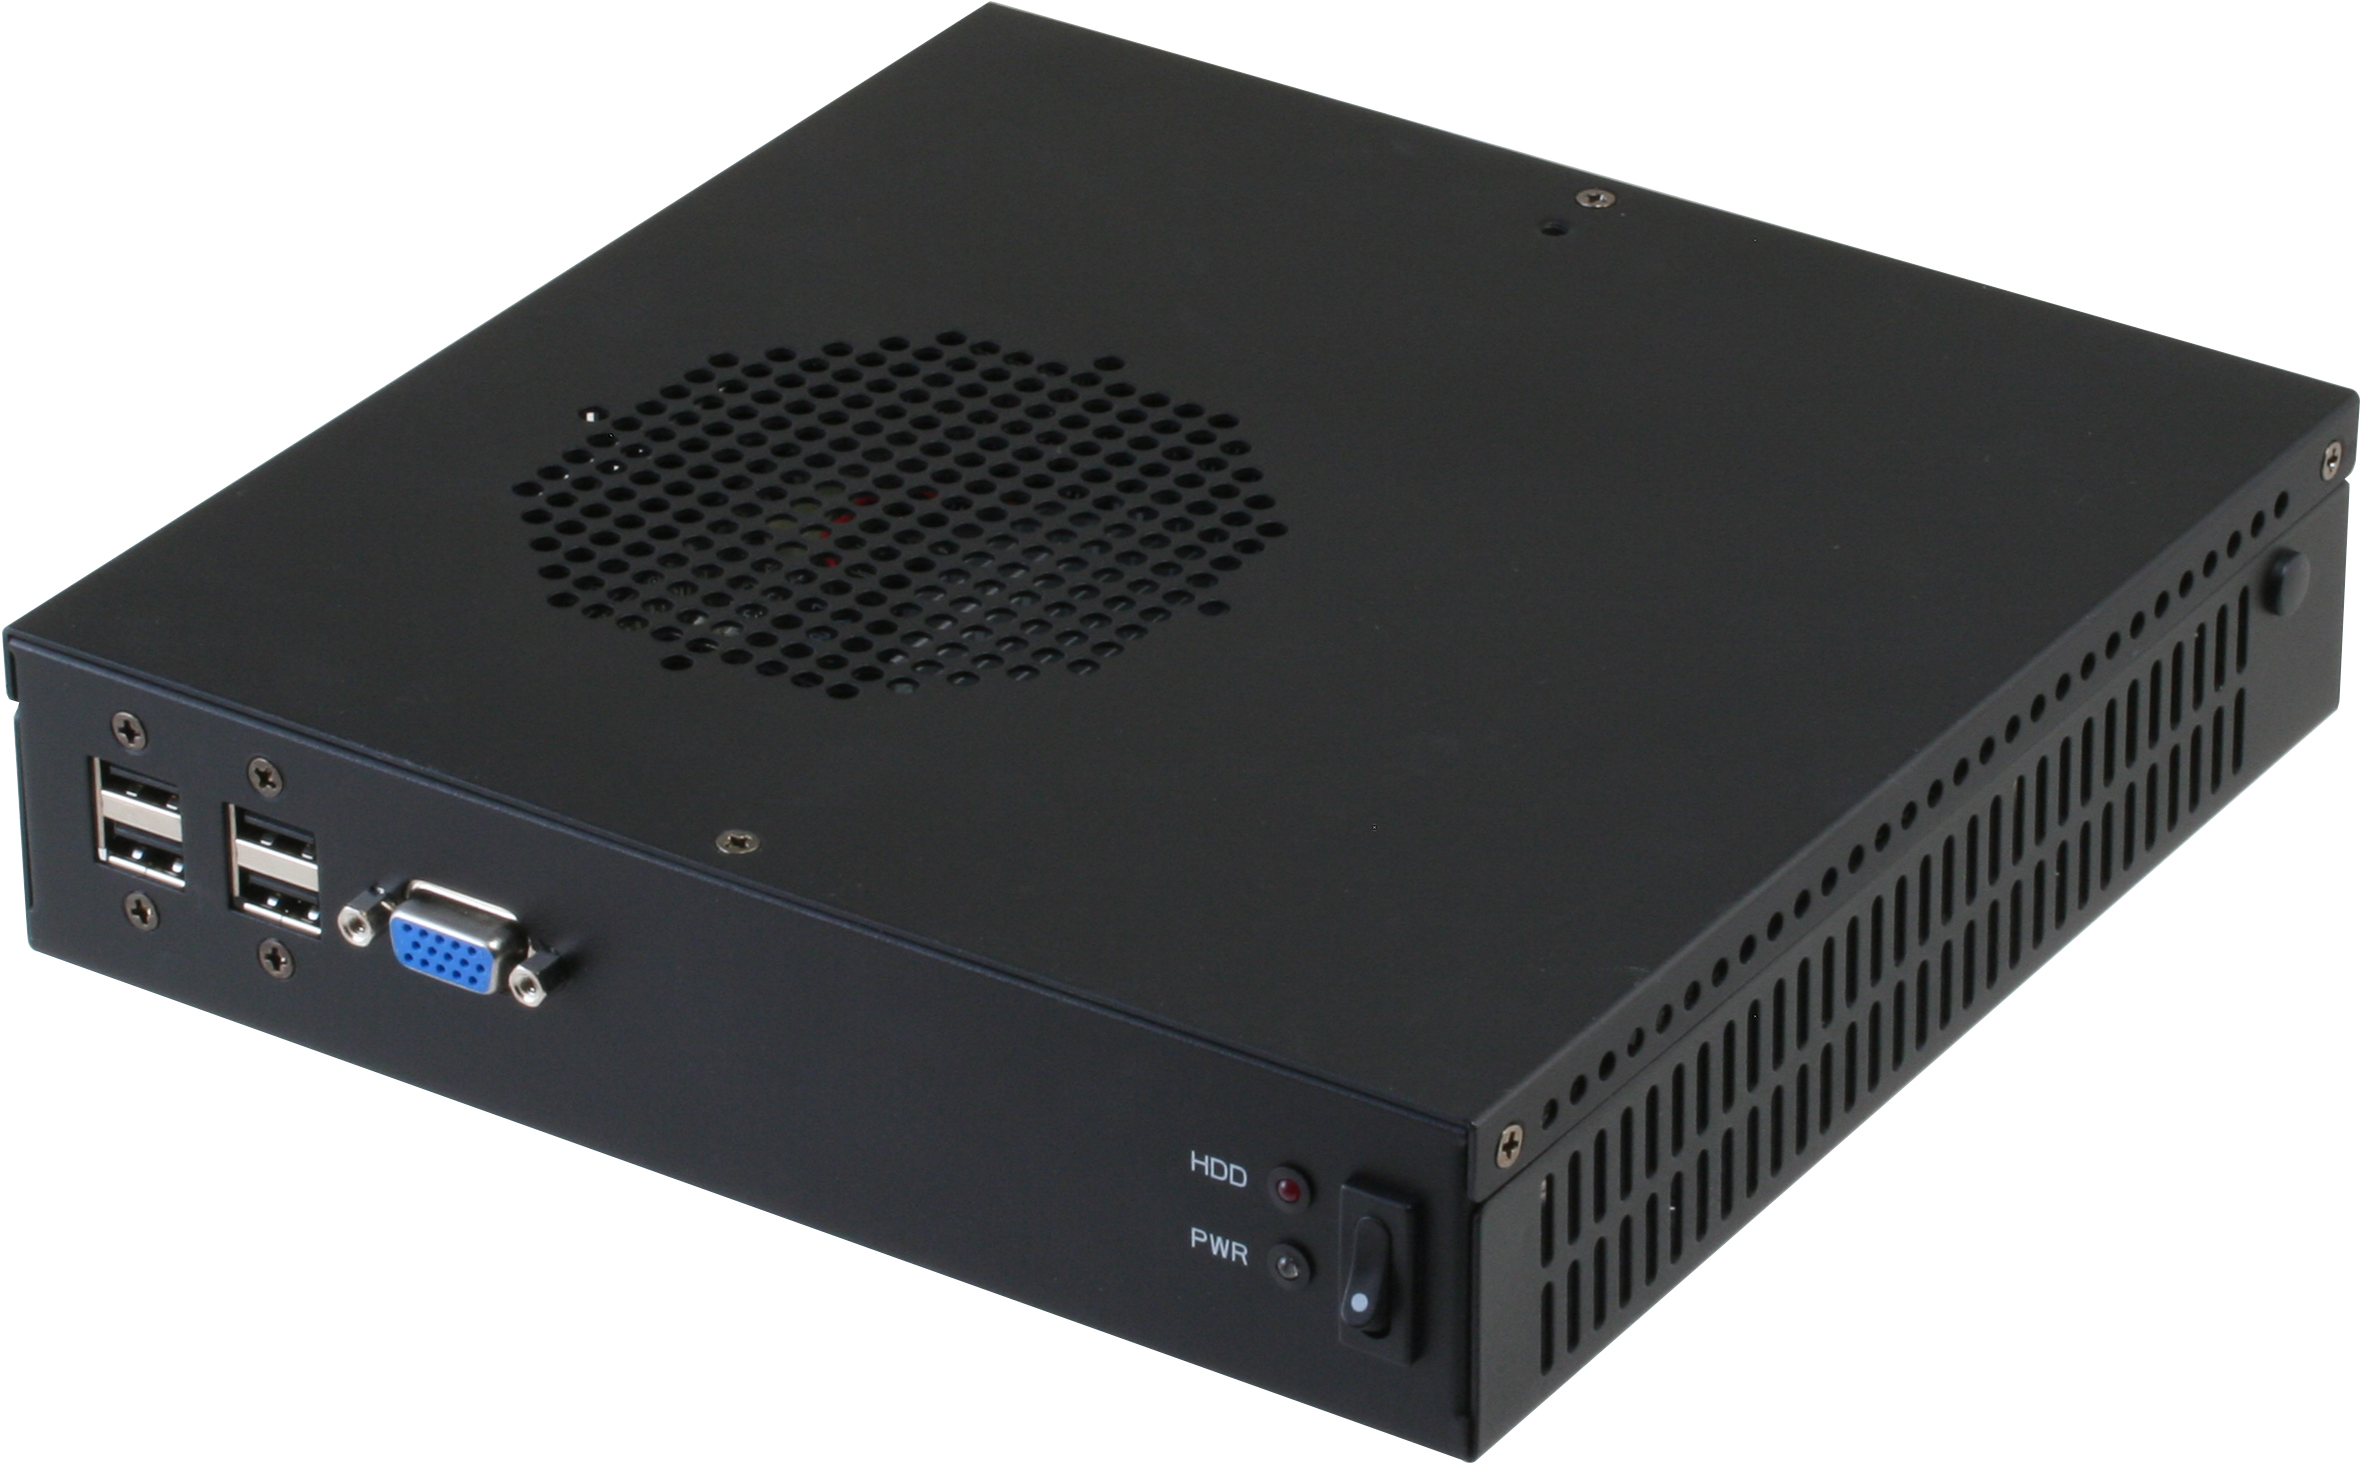 Accelerate Development Times, Increase Reliability with Low-Profile Mini-ITX Systems